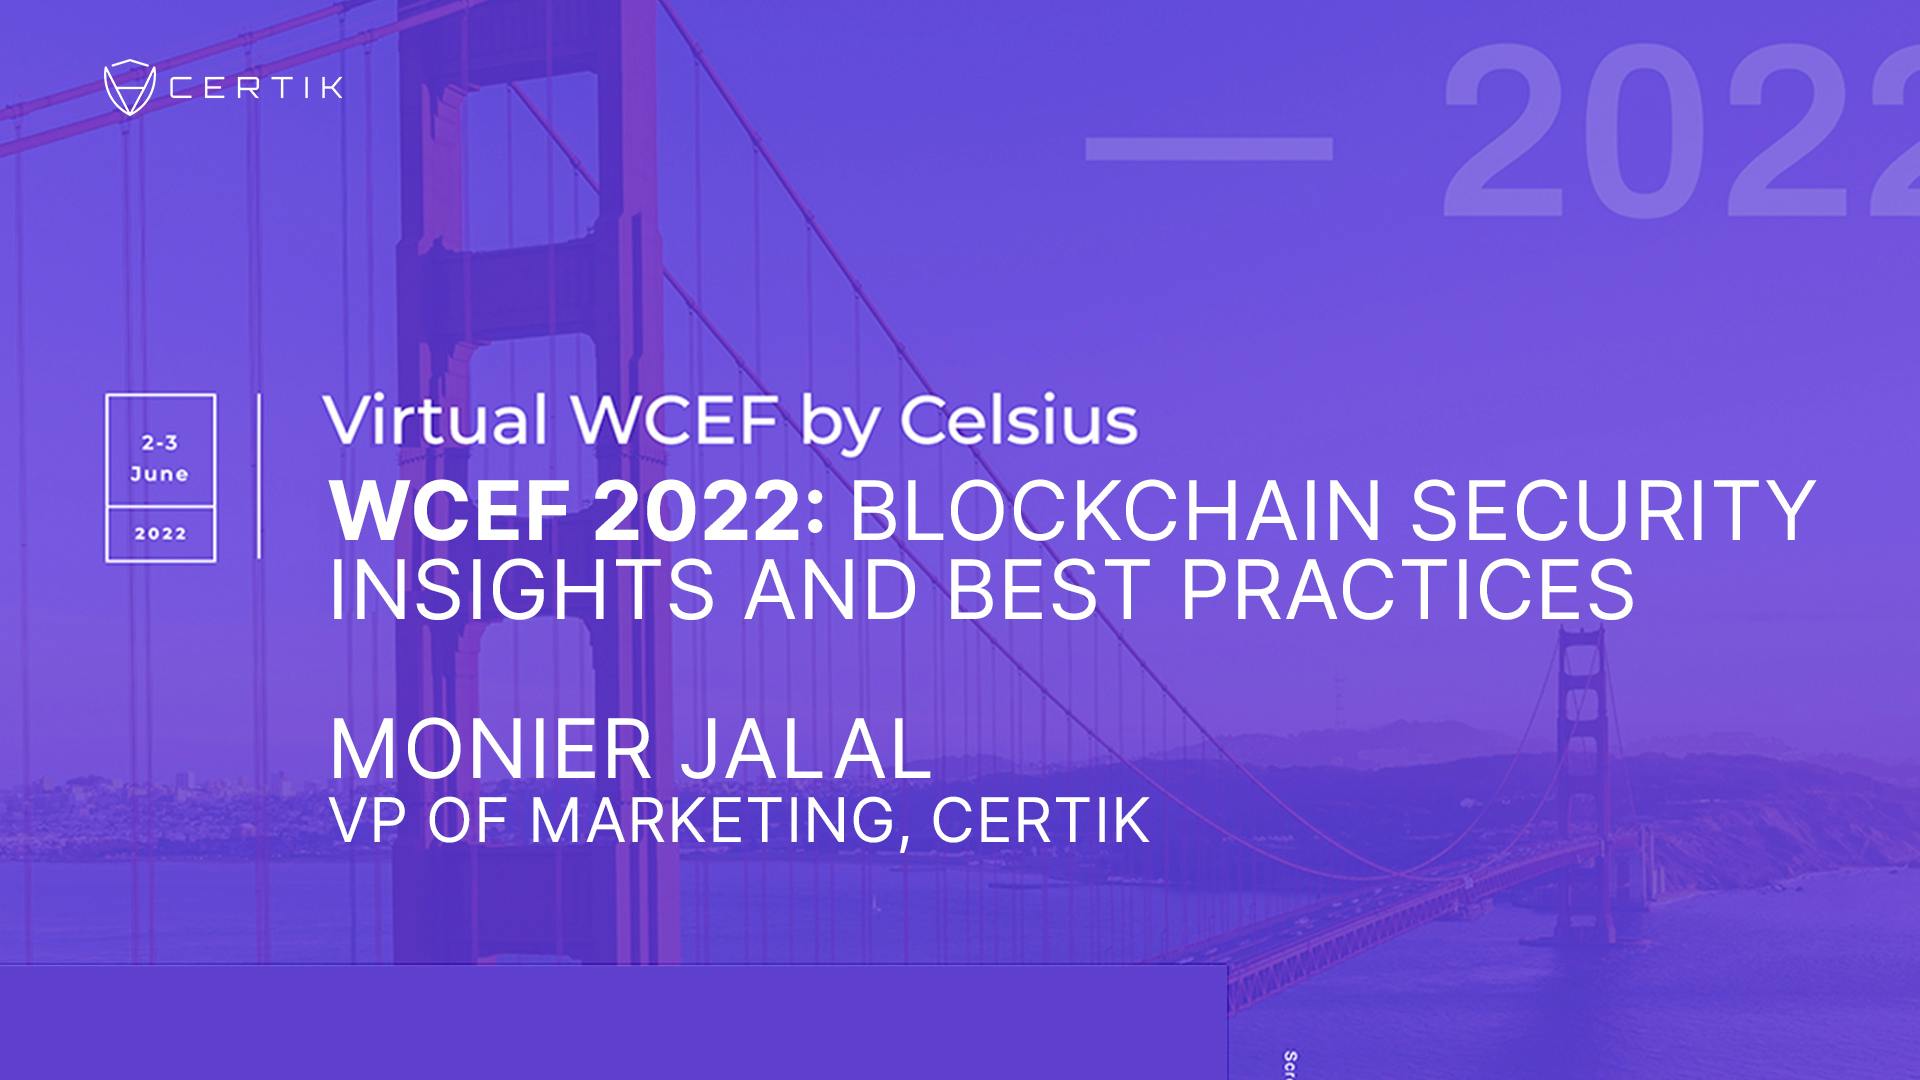 WCEF 2022: Blockchain Security Insights and Best Practices